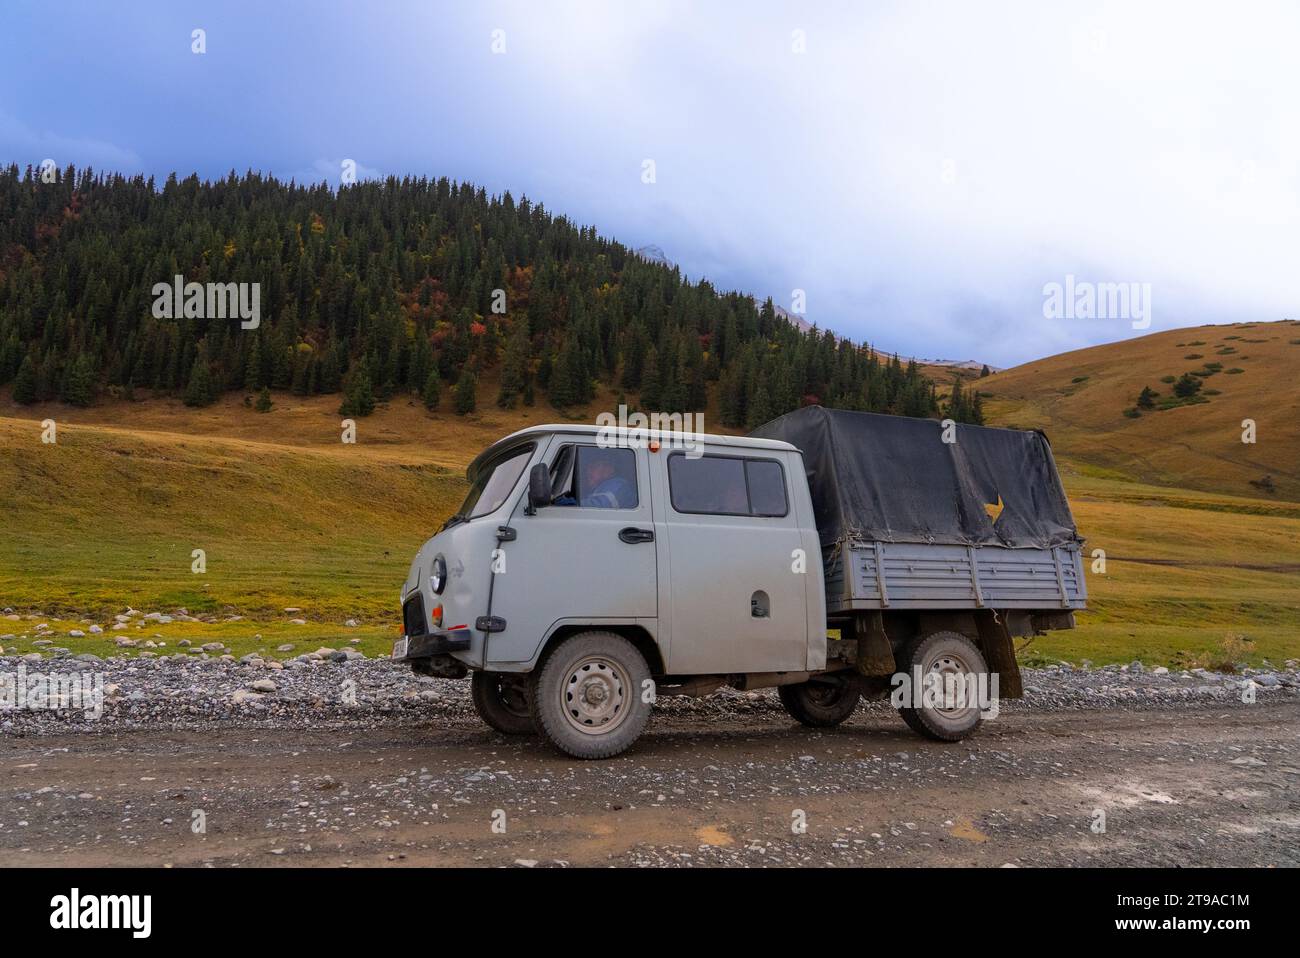 Old Russian truck in use on a rural dirt road in Kyrgyzstan Stock Photo